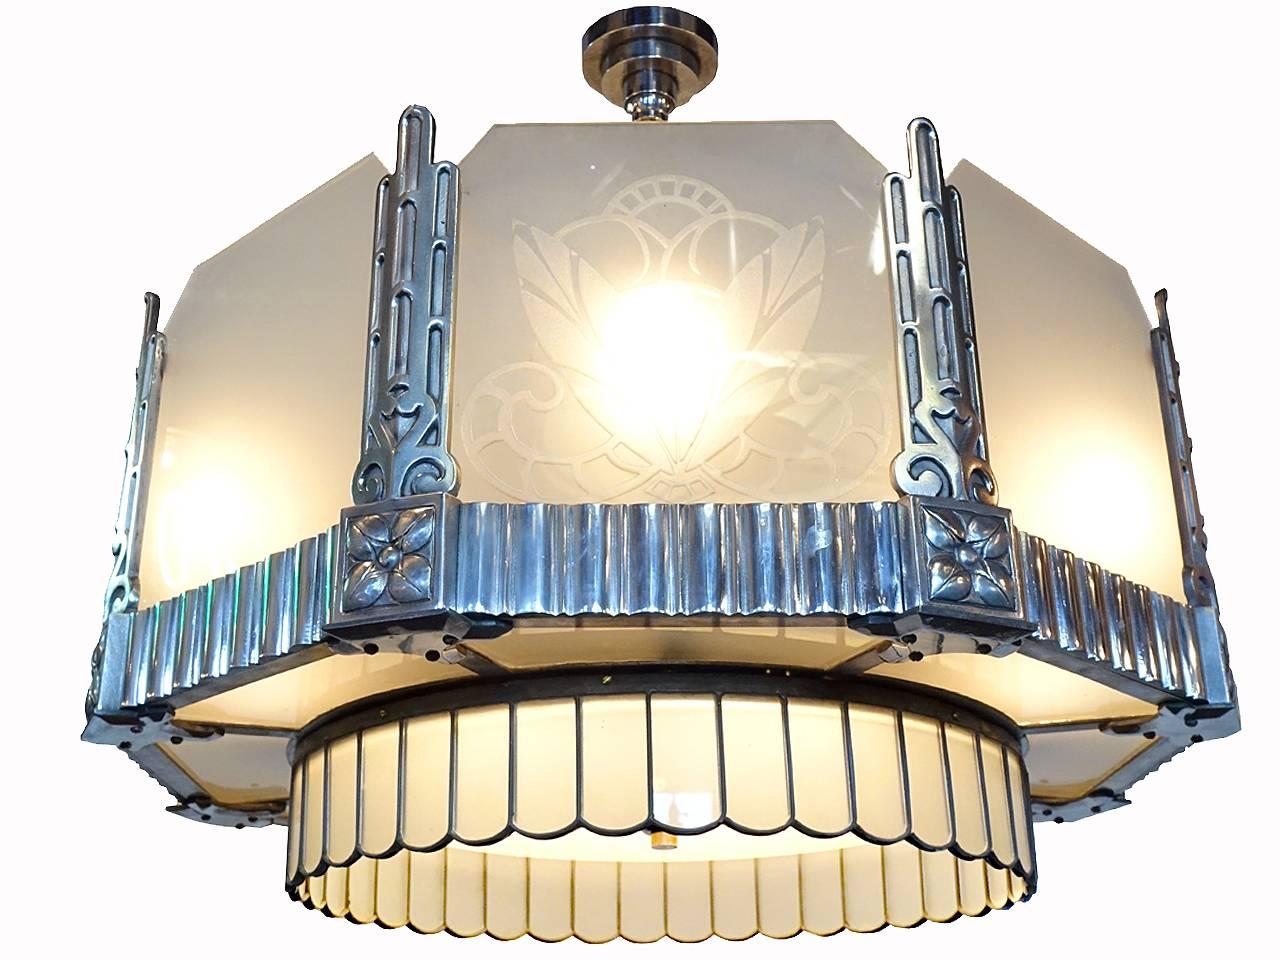 This is a matching set of three Art Deco lamps. If you collect early brass blade fans then you already know this is as rare as it gets. The collection includes one large decorative chandelier and two matching ceiling fan lamps. These were designed